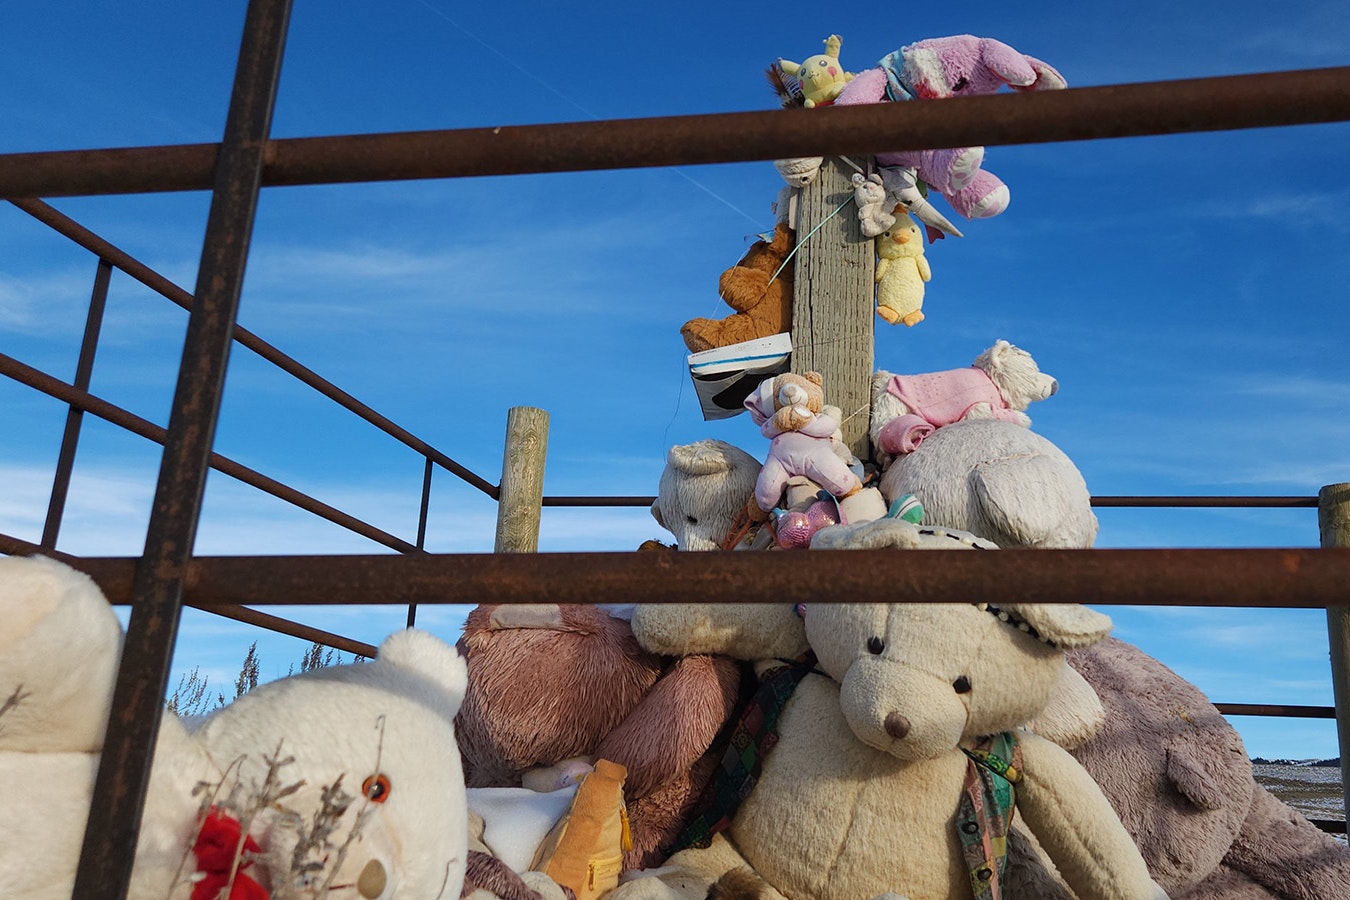 A recent group of local volunteers built a fence around Teddy Bear Corner and replaced its post, preserving the spot for another century.